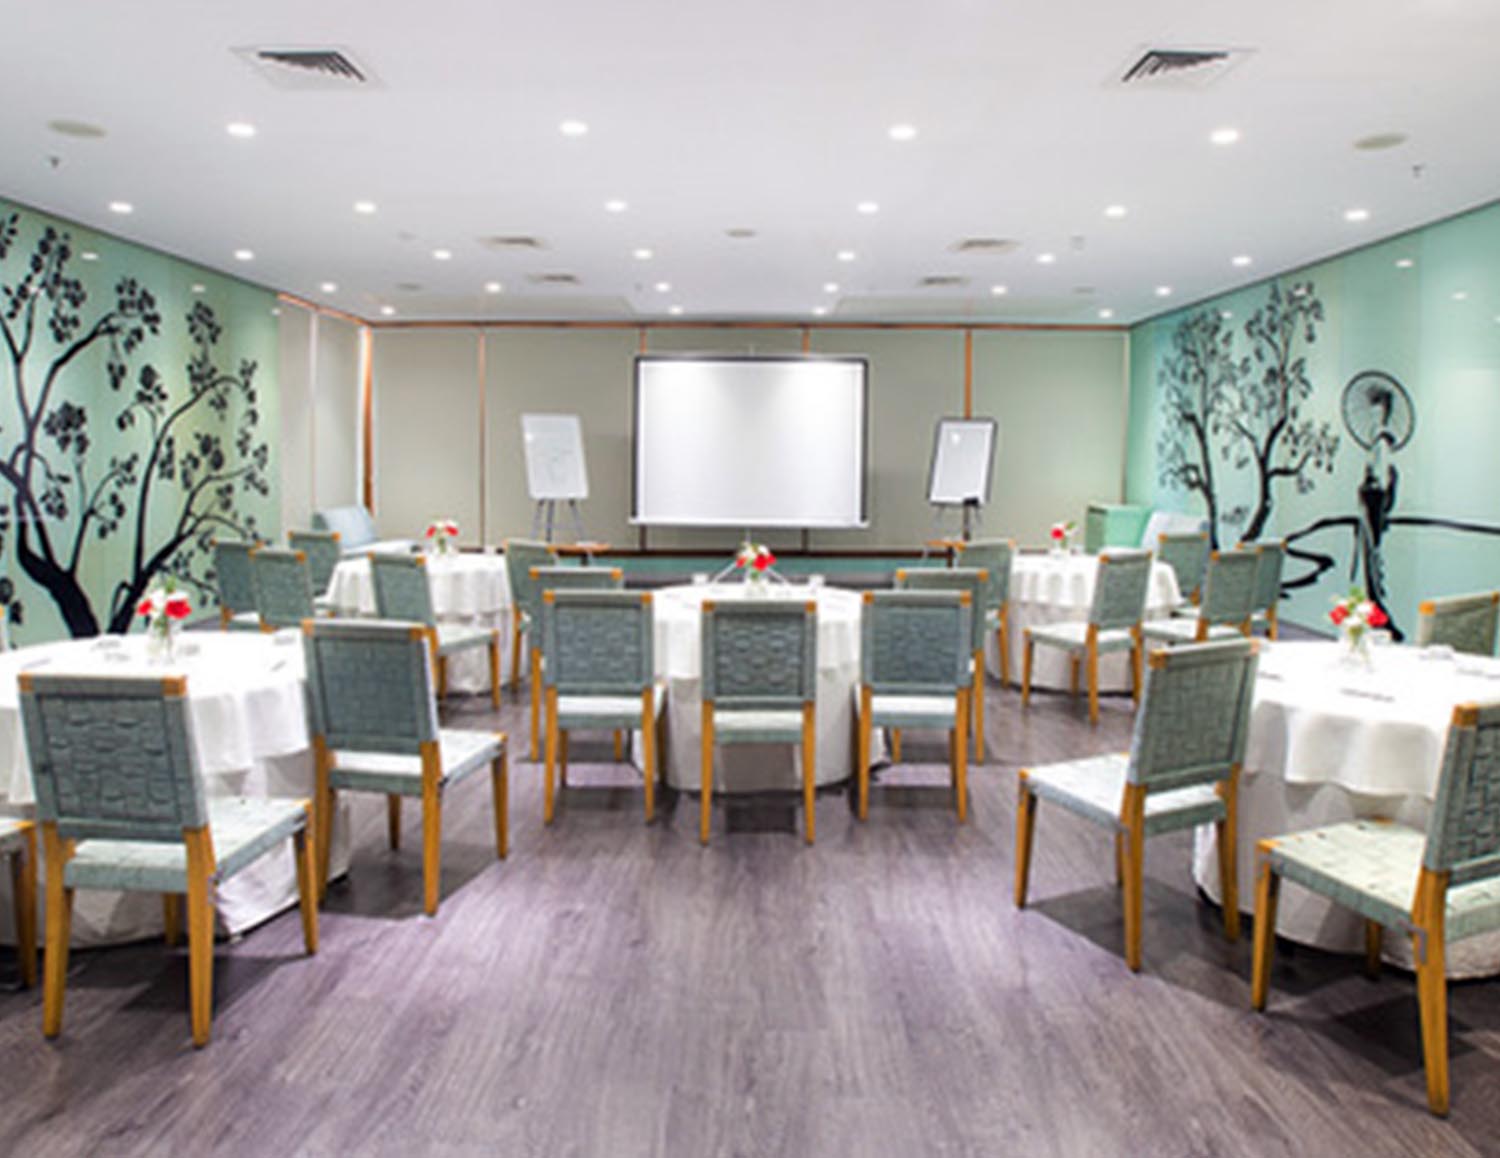 Waterstones Conference Rooms: The Best Location for Business Meetings